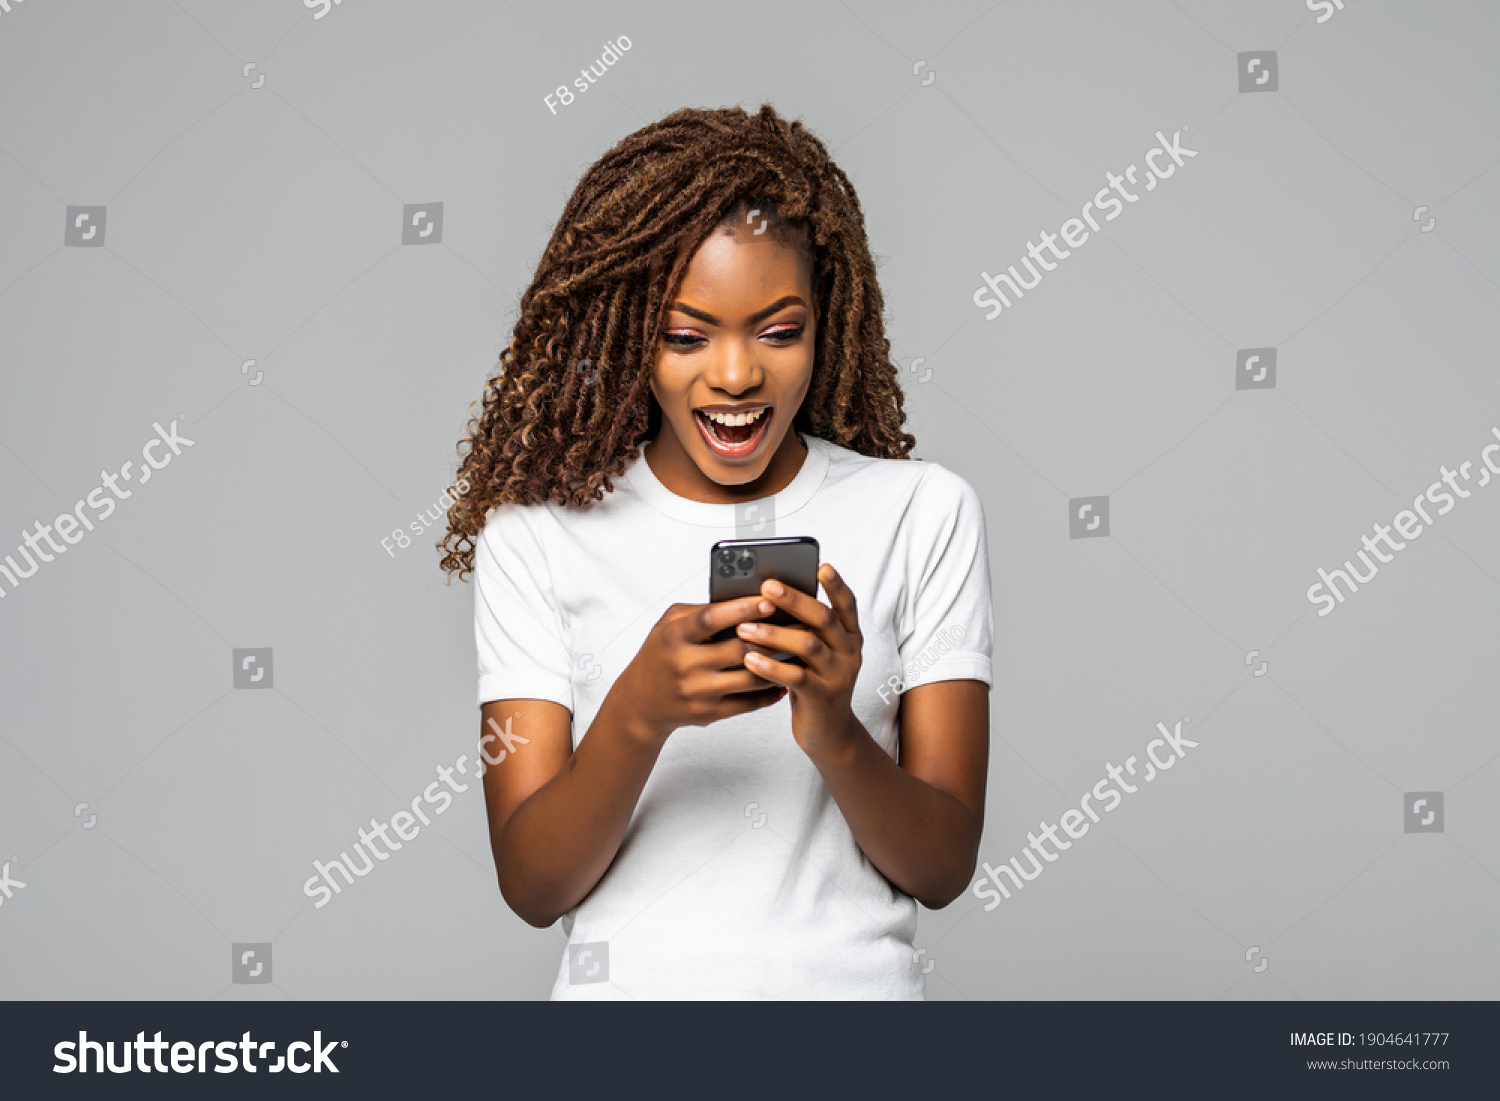 Excited woman texting on her phone isolated over white background #1904641777